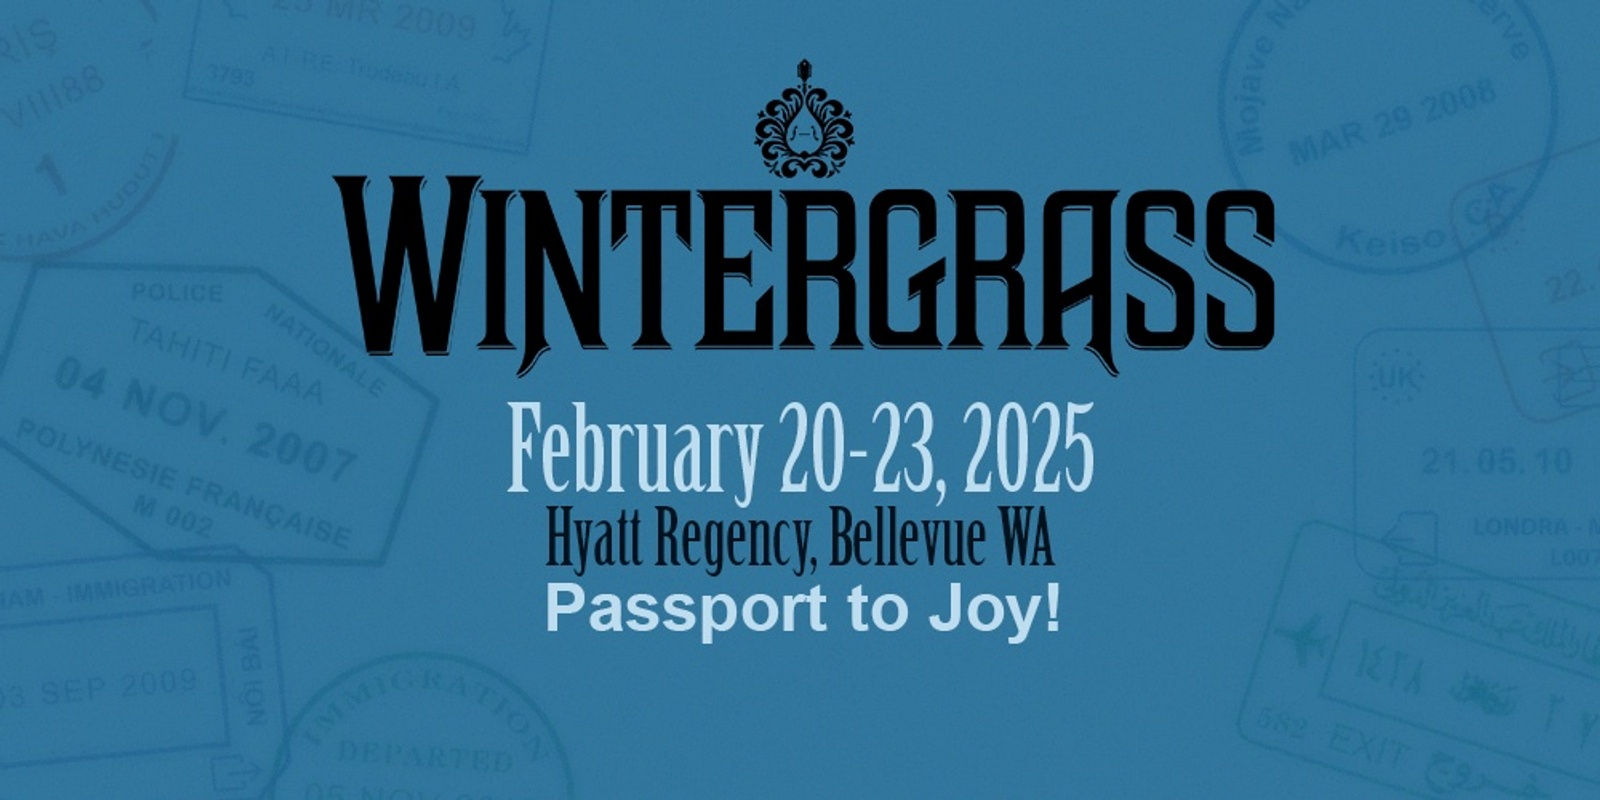 Banner image for Wintergrass 2025 